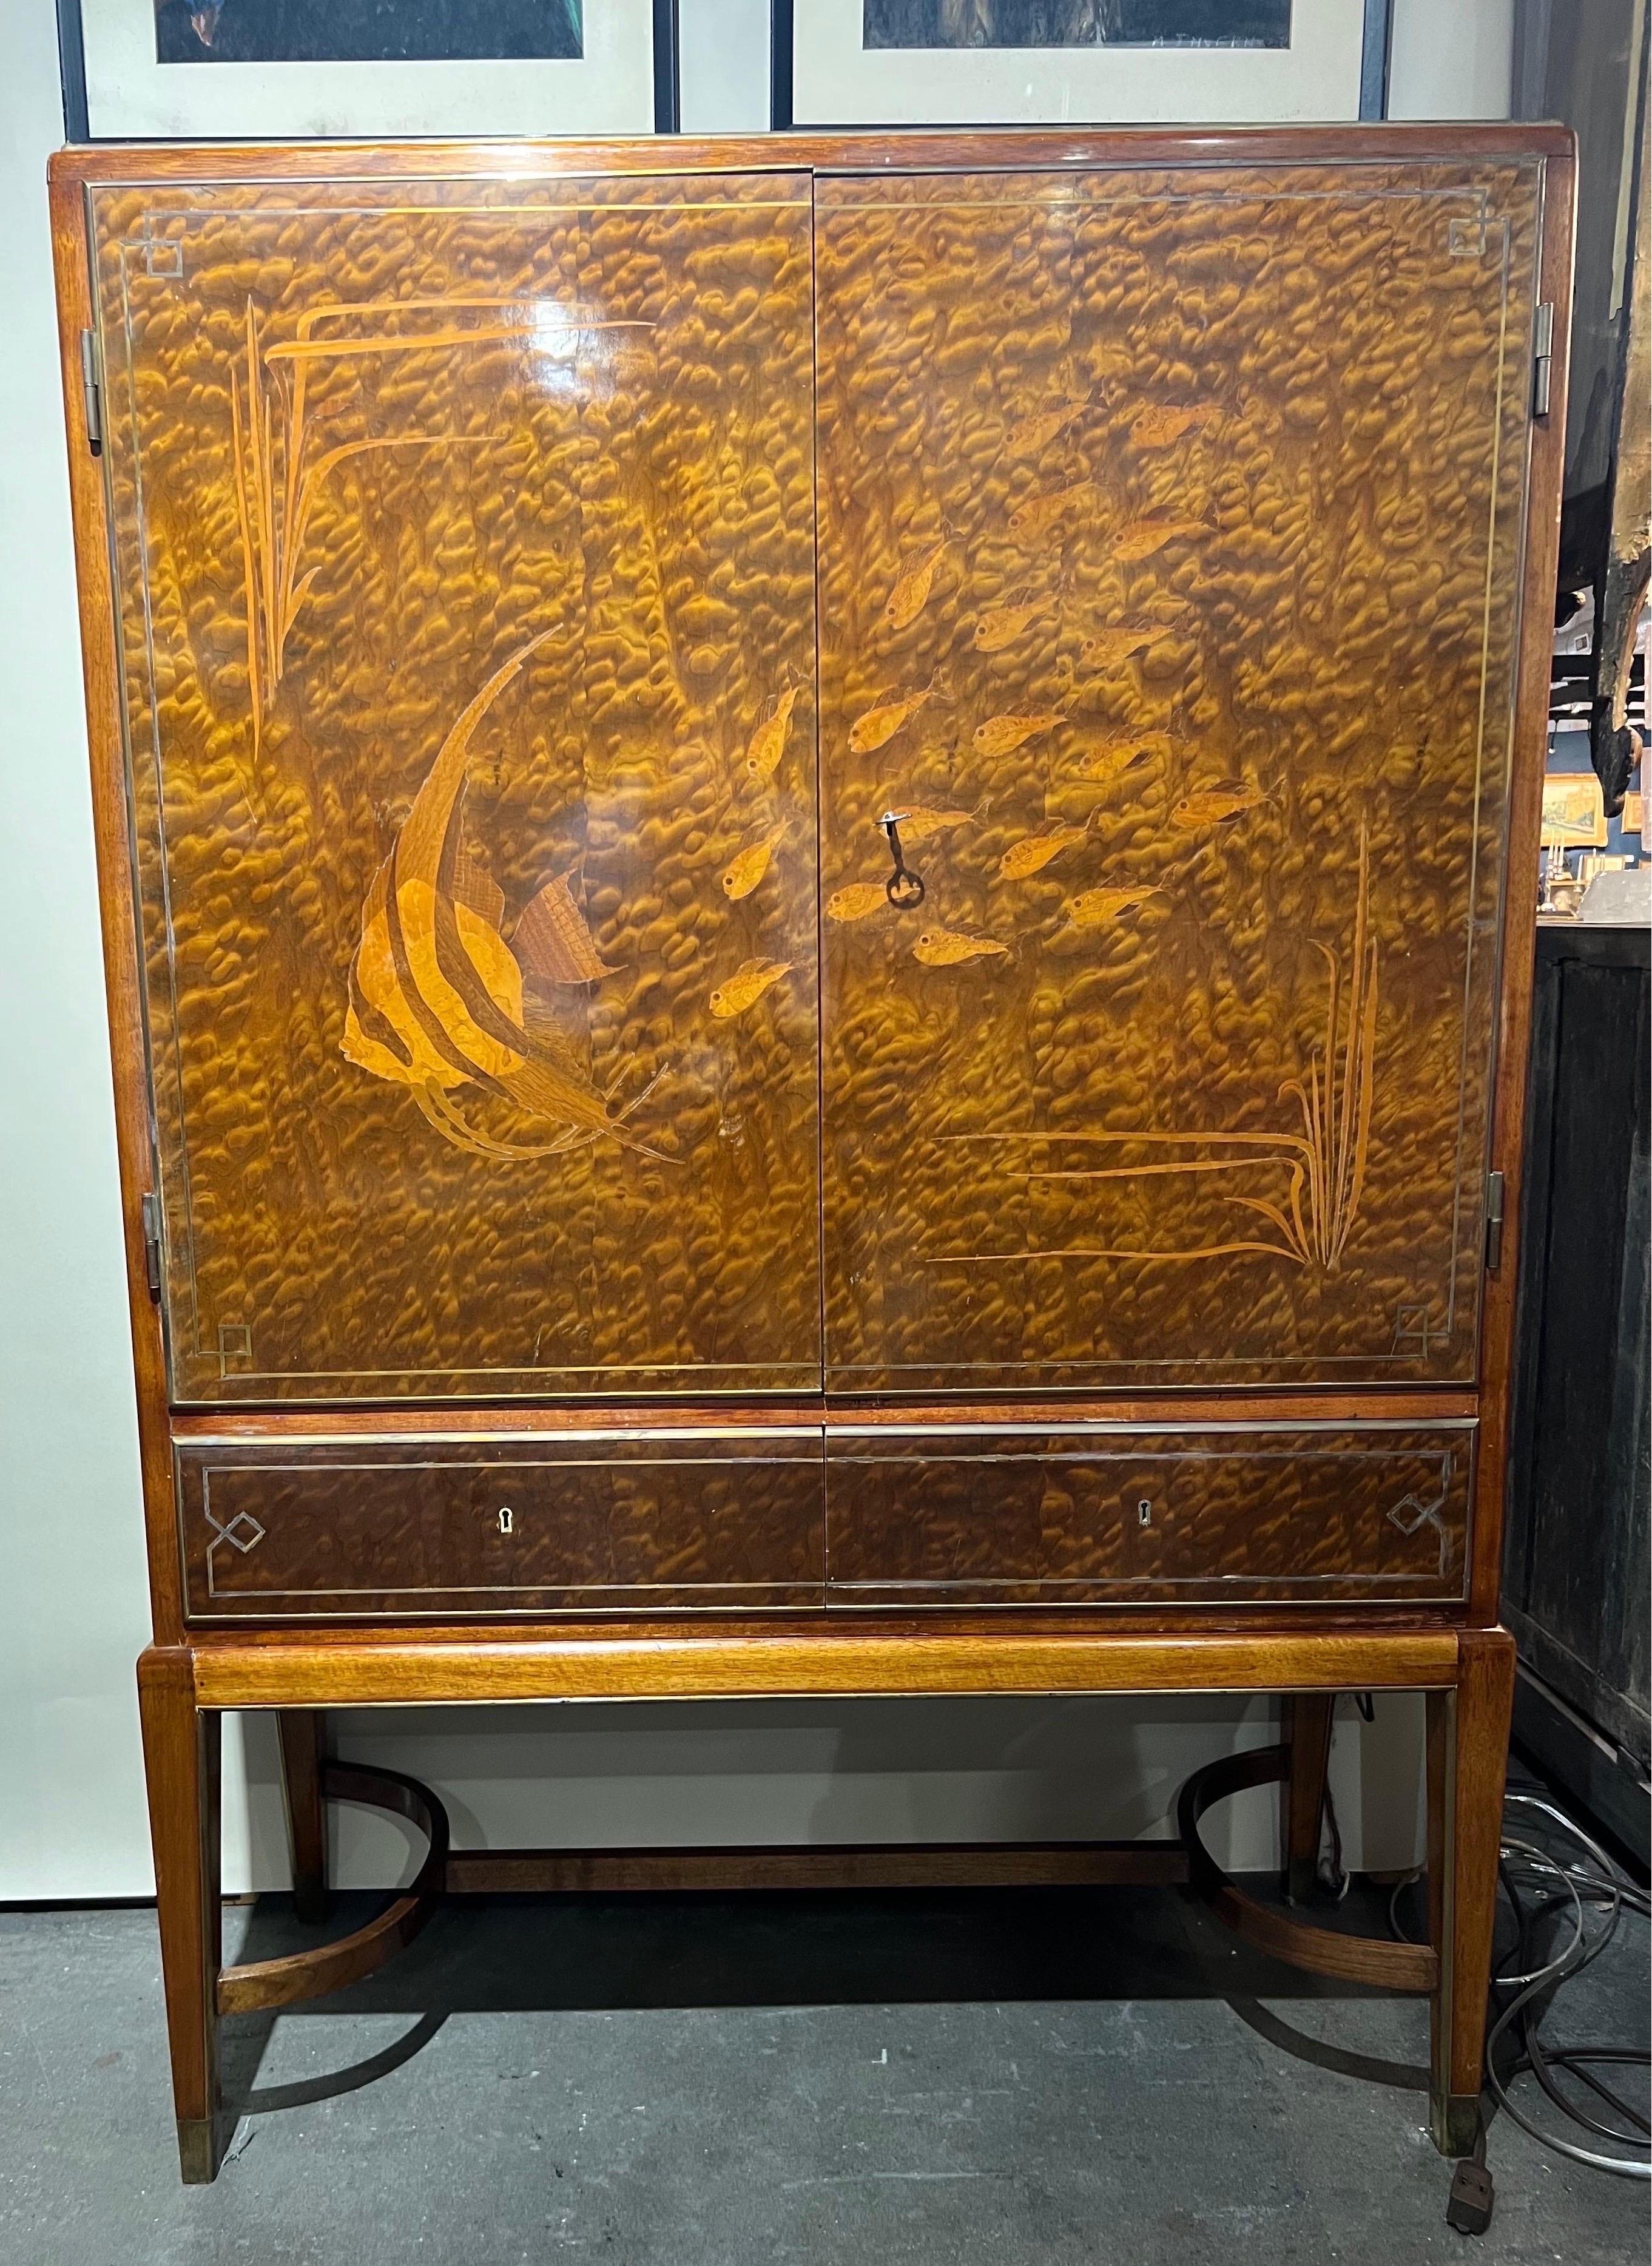 Spectacular brass mounted fish inlaid art deco bar with two drawers. The individual fish and seaweed are inlaid and made of an exotic hardwood. The background is a HIGHLY figured exotic hardwood that is cut in a way to resemble water. The interior